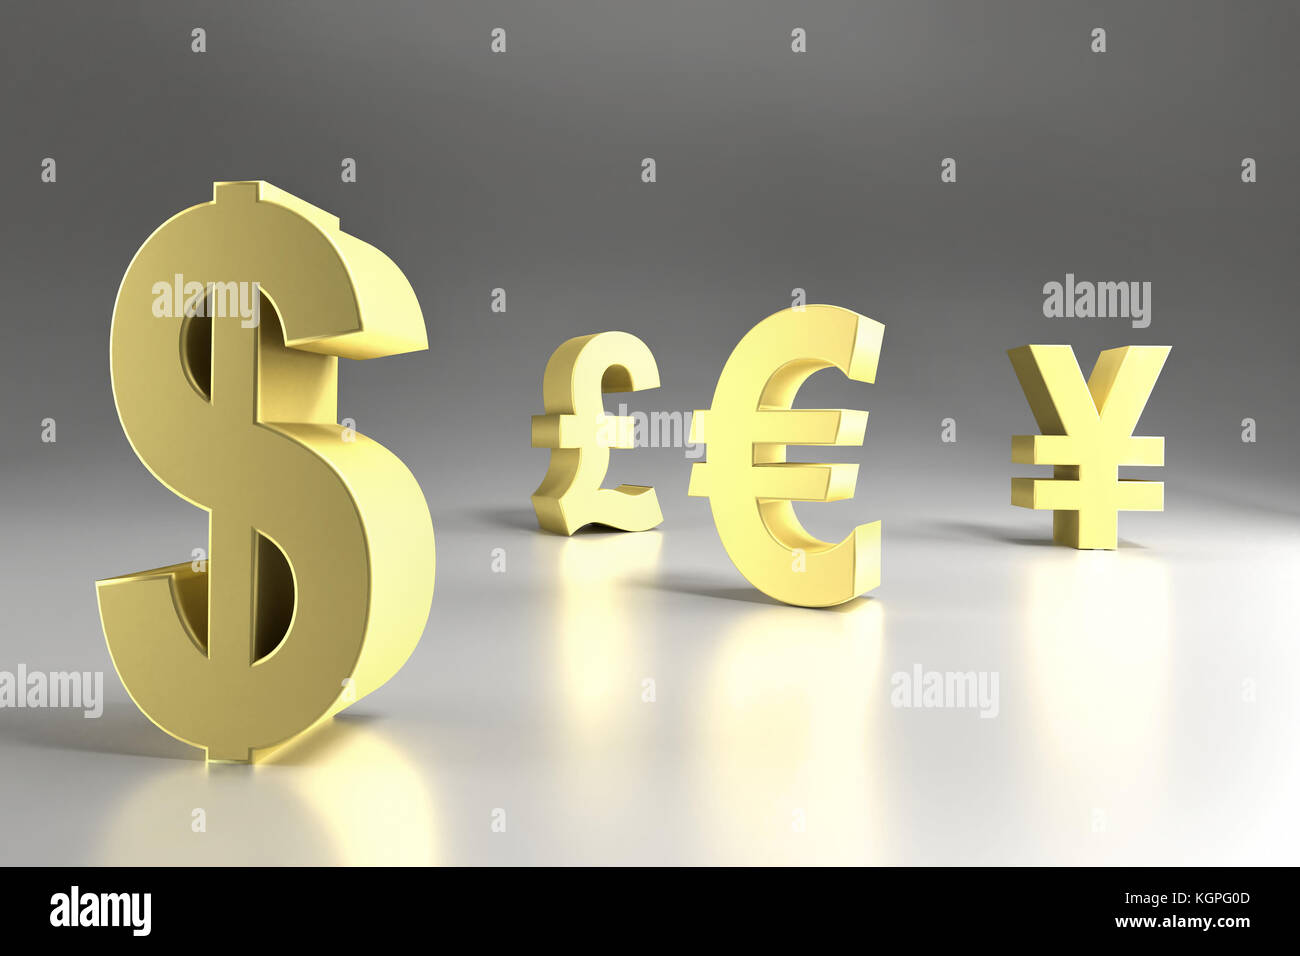 3D rendering of four major currency symbols in golden color - Dollar, Pound Sterling, Euro and Yen Stock Photo